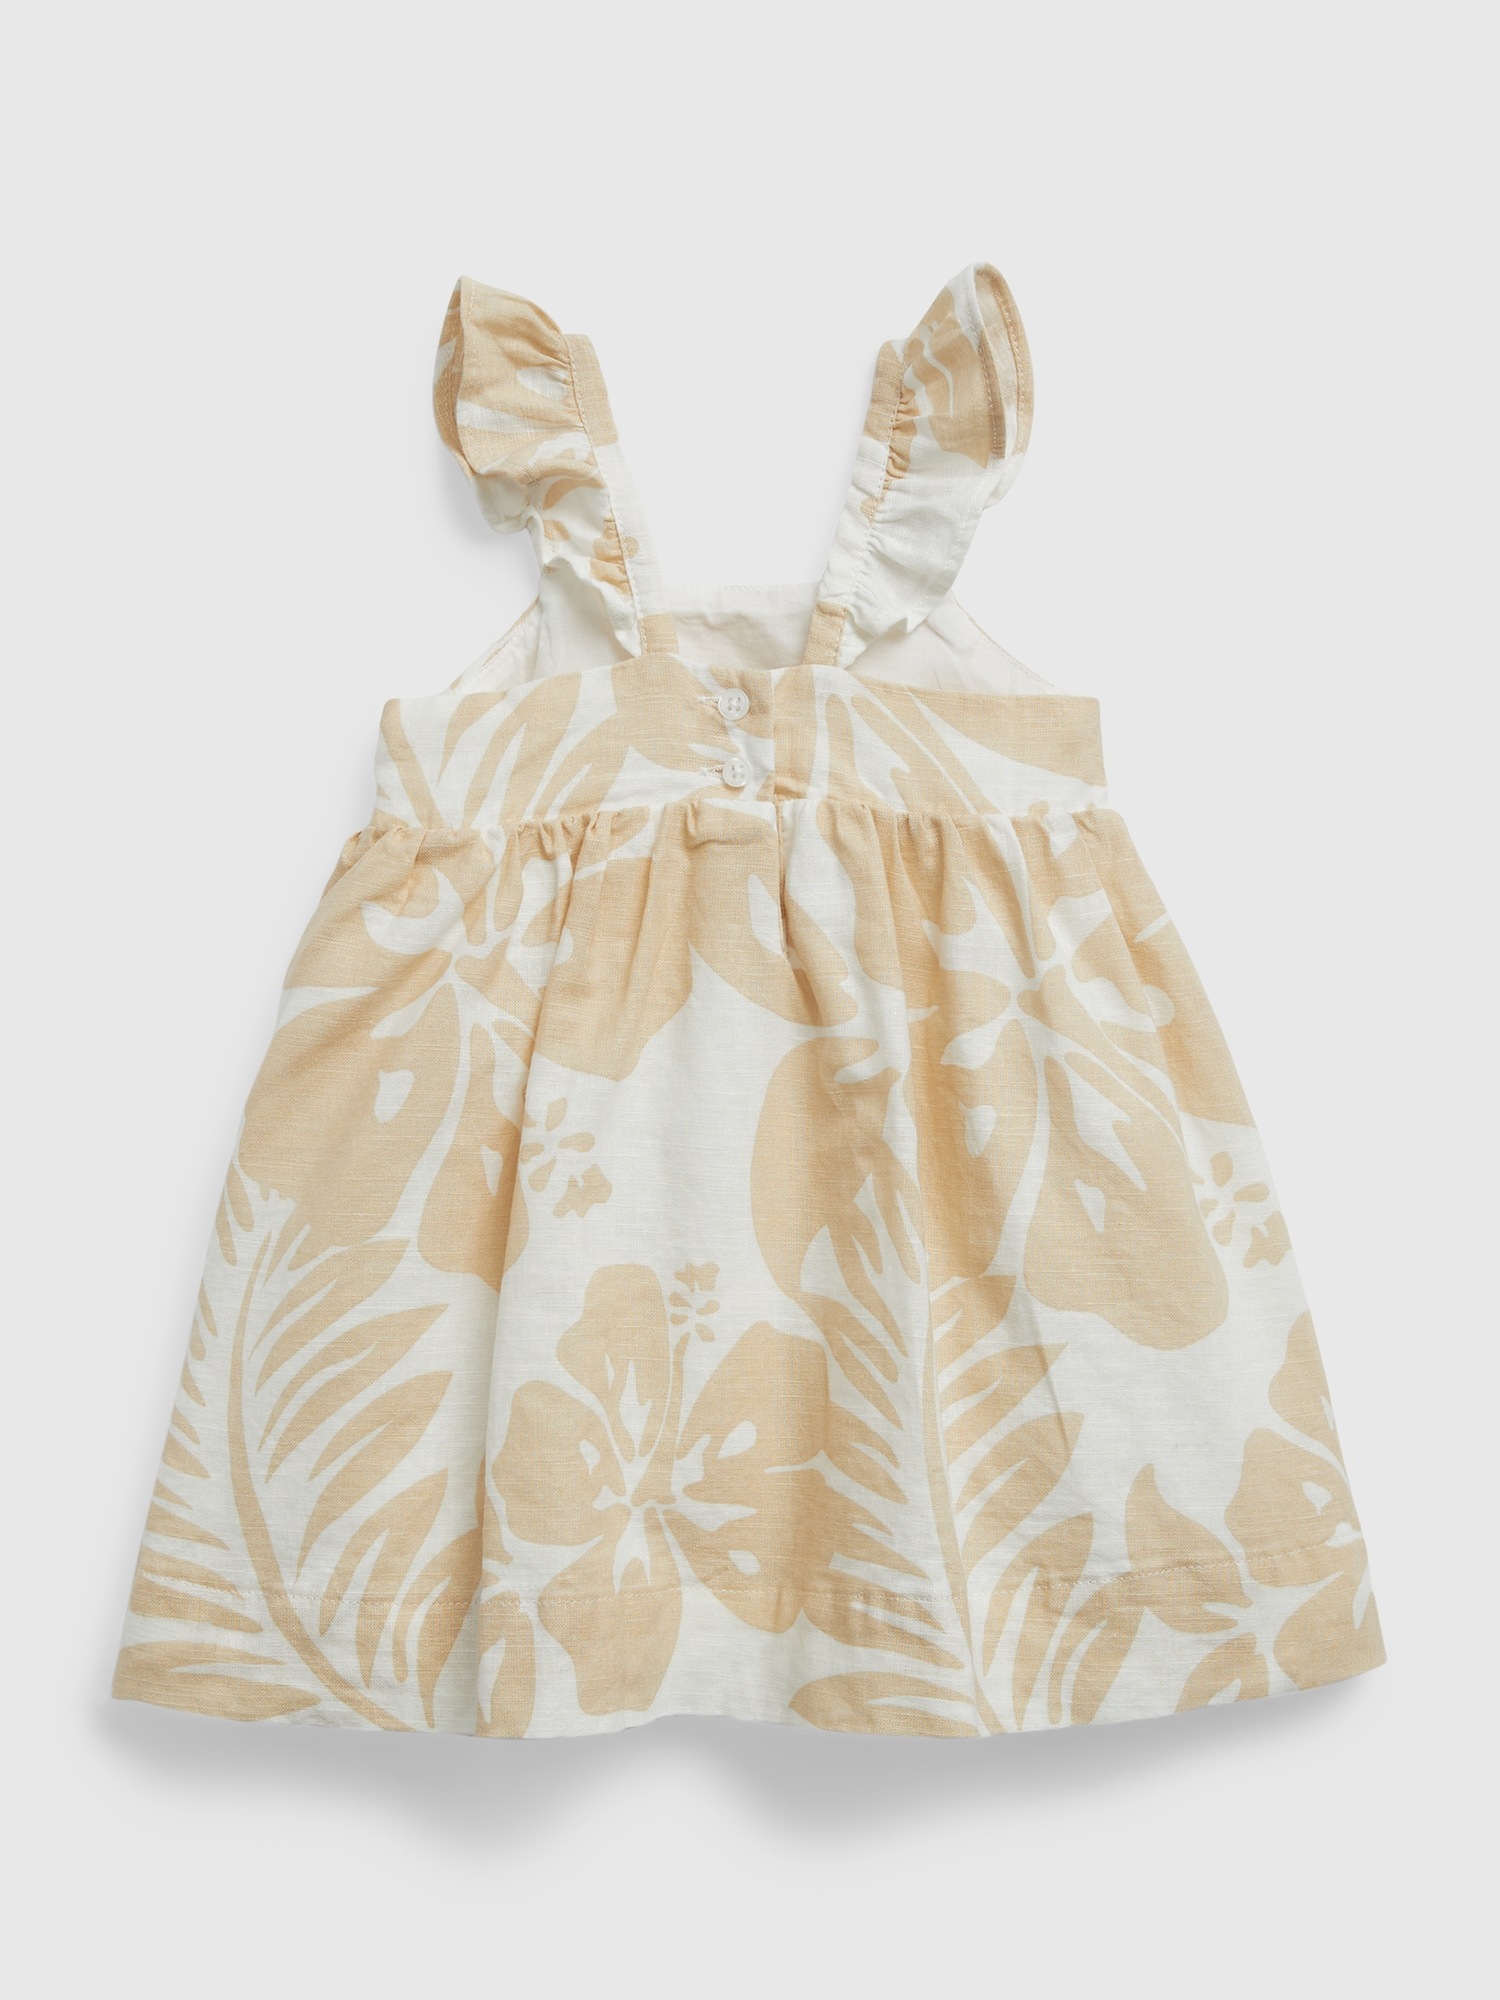 Lavender Floral Cotton Baby Dress Set Back With Lining Perfect For Summer  From Jia08, $19.95